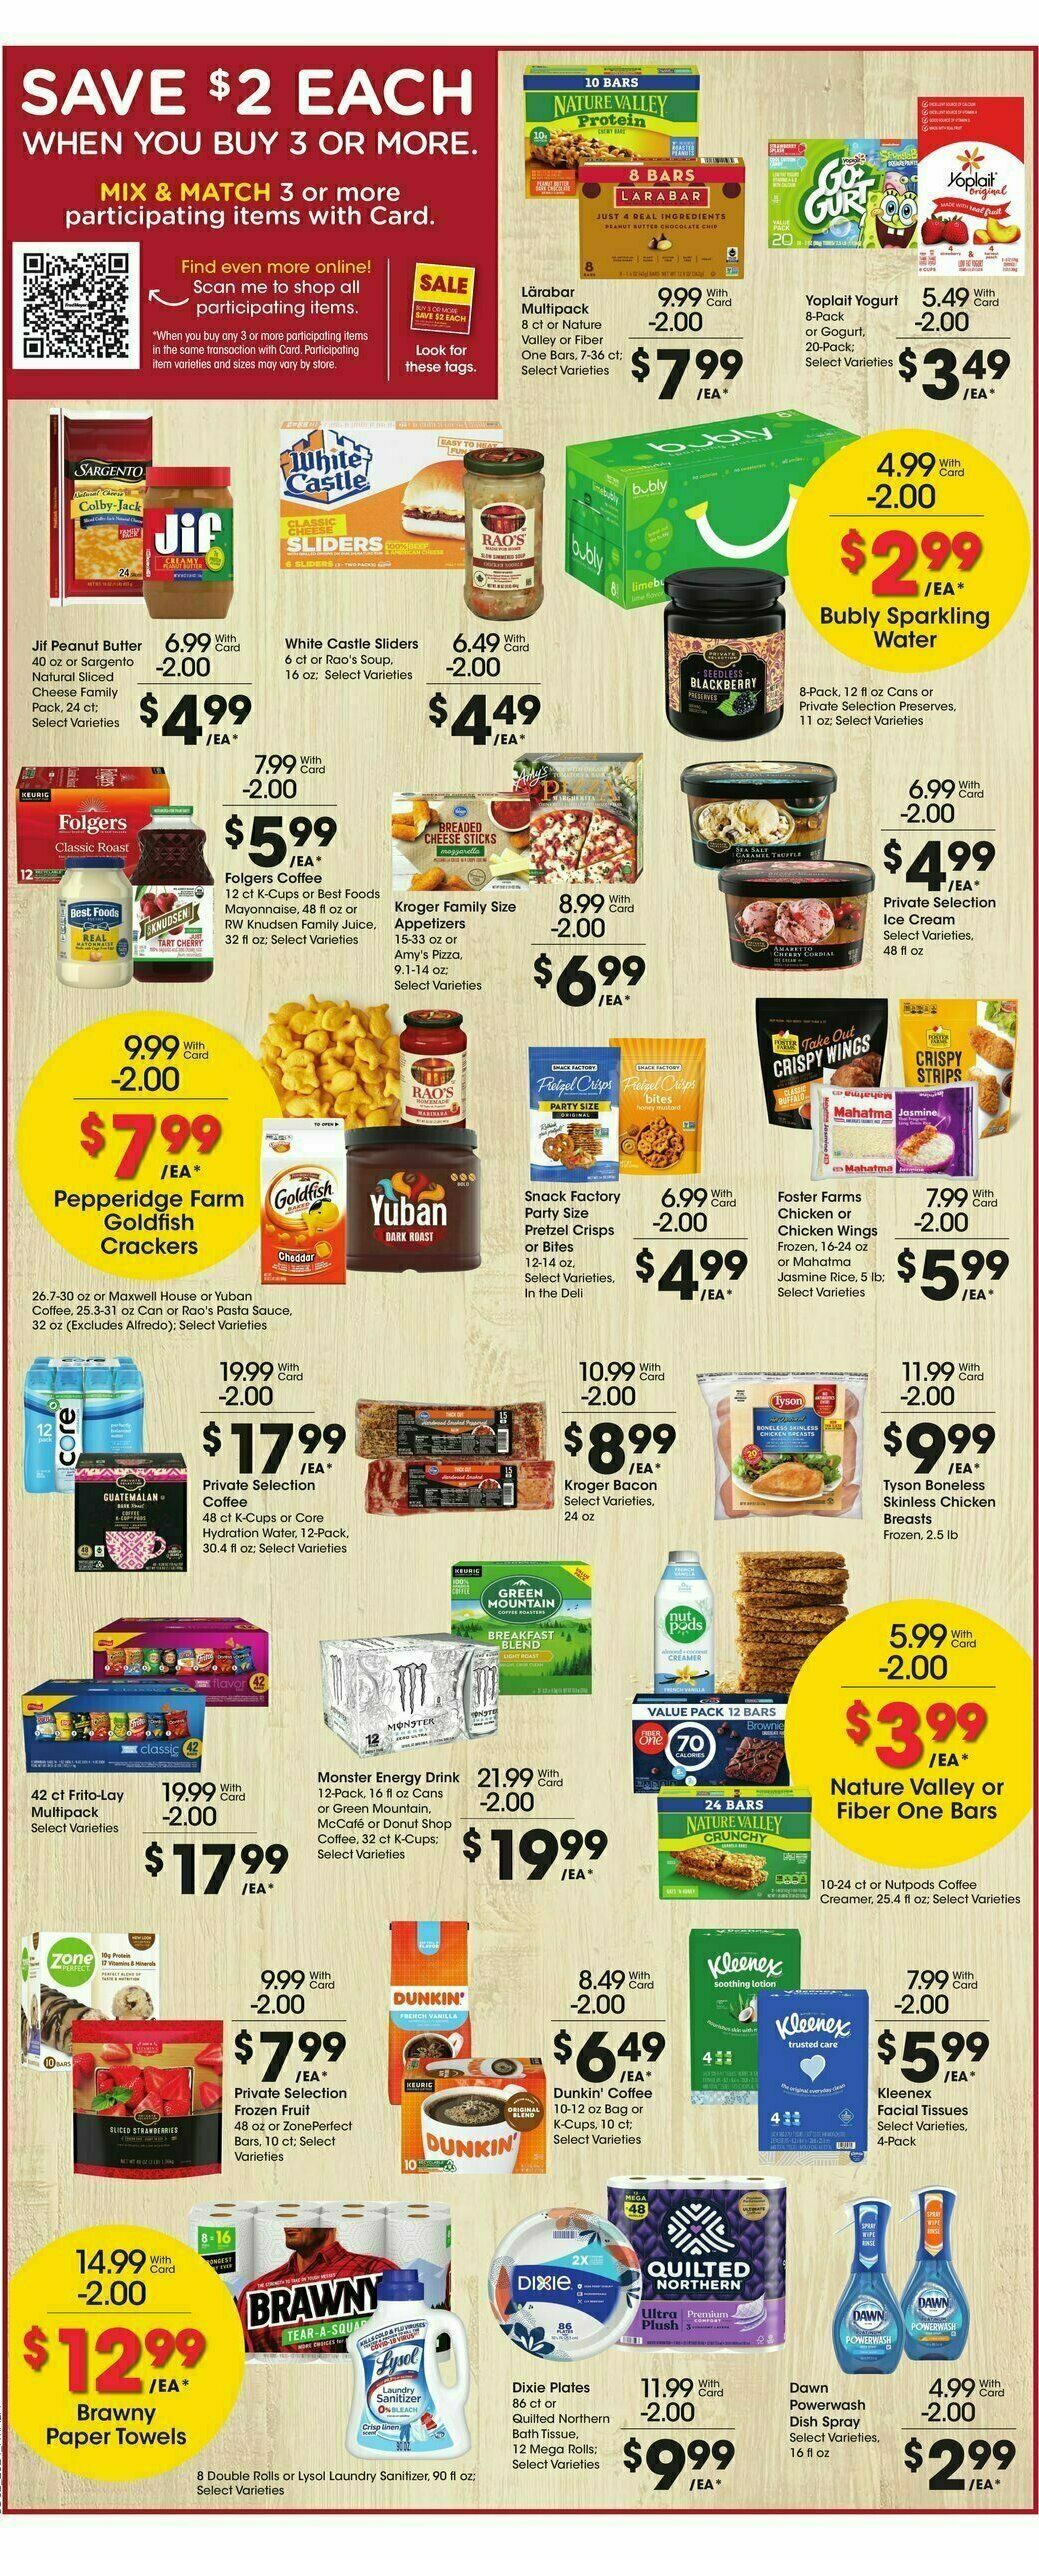 Fred Meyer Weekly Ad from July 12